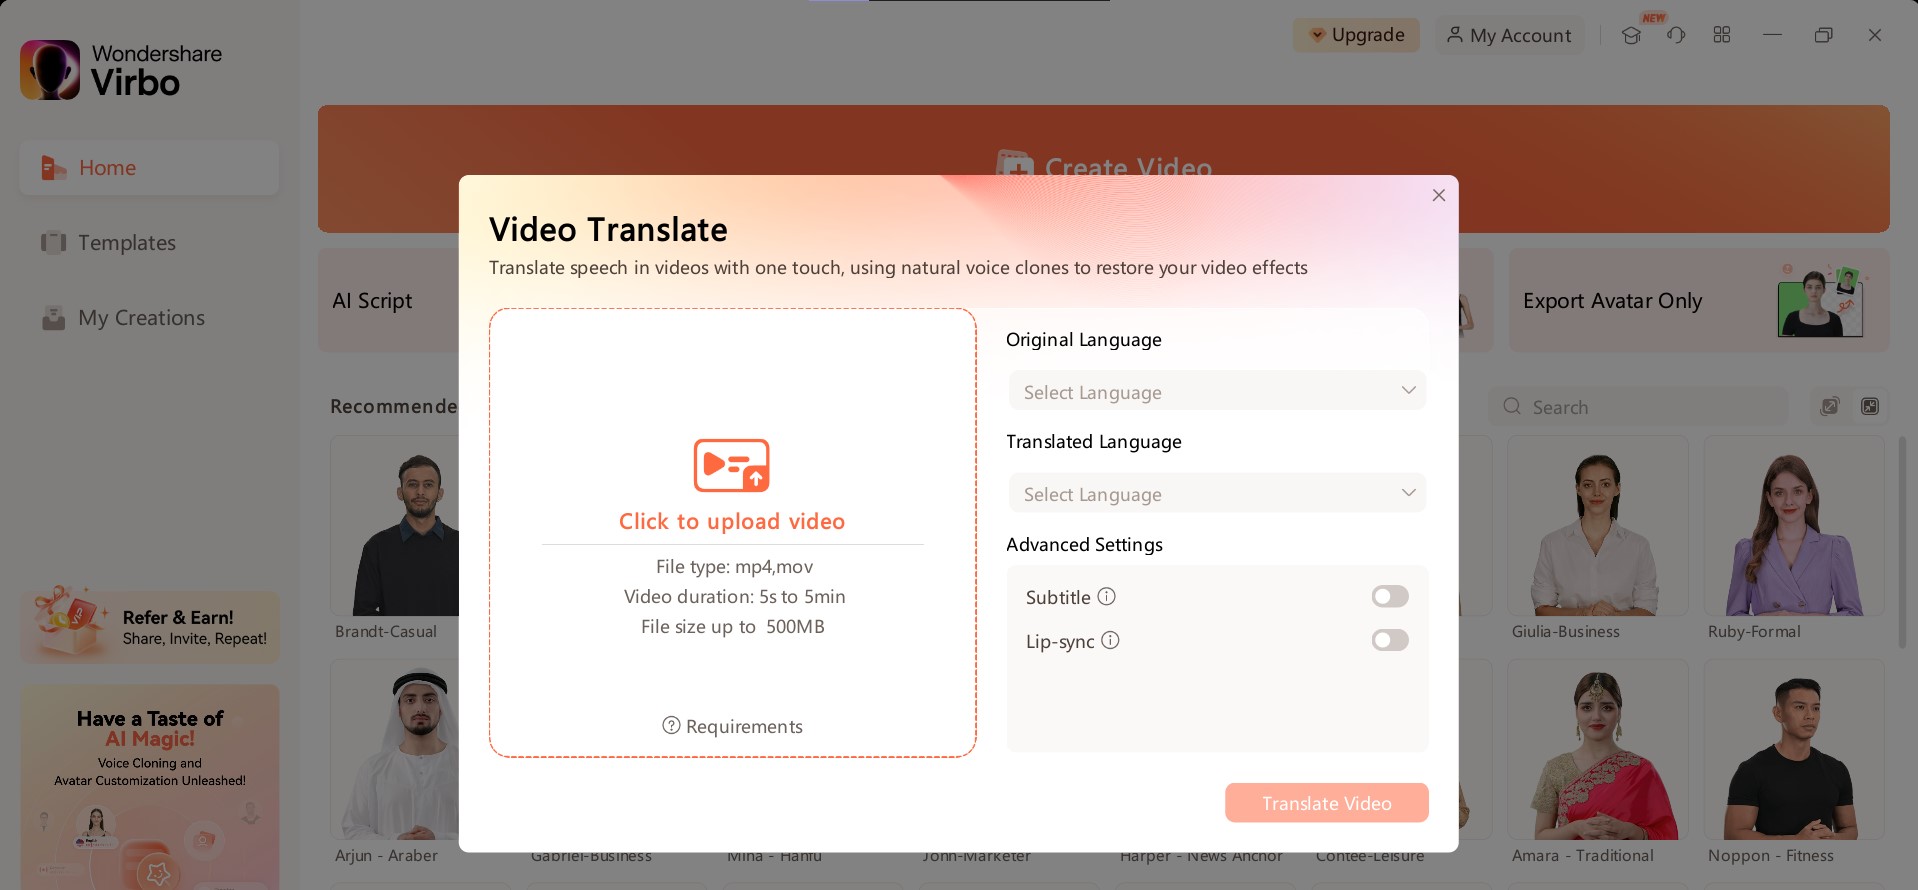 virbo's video upload page